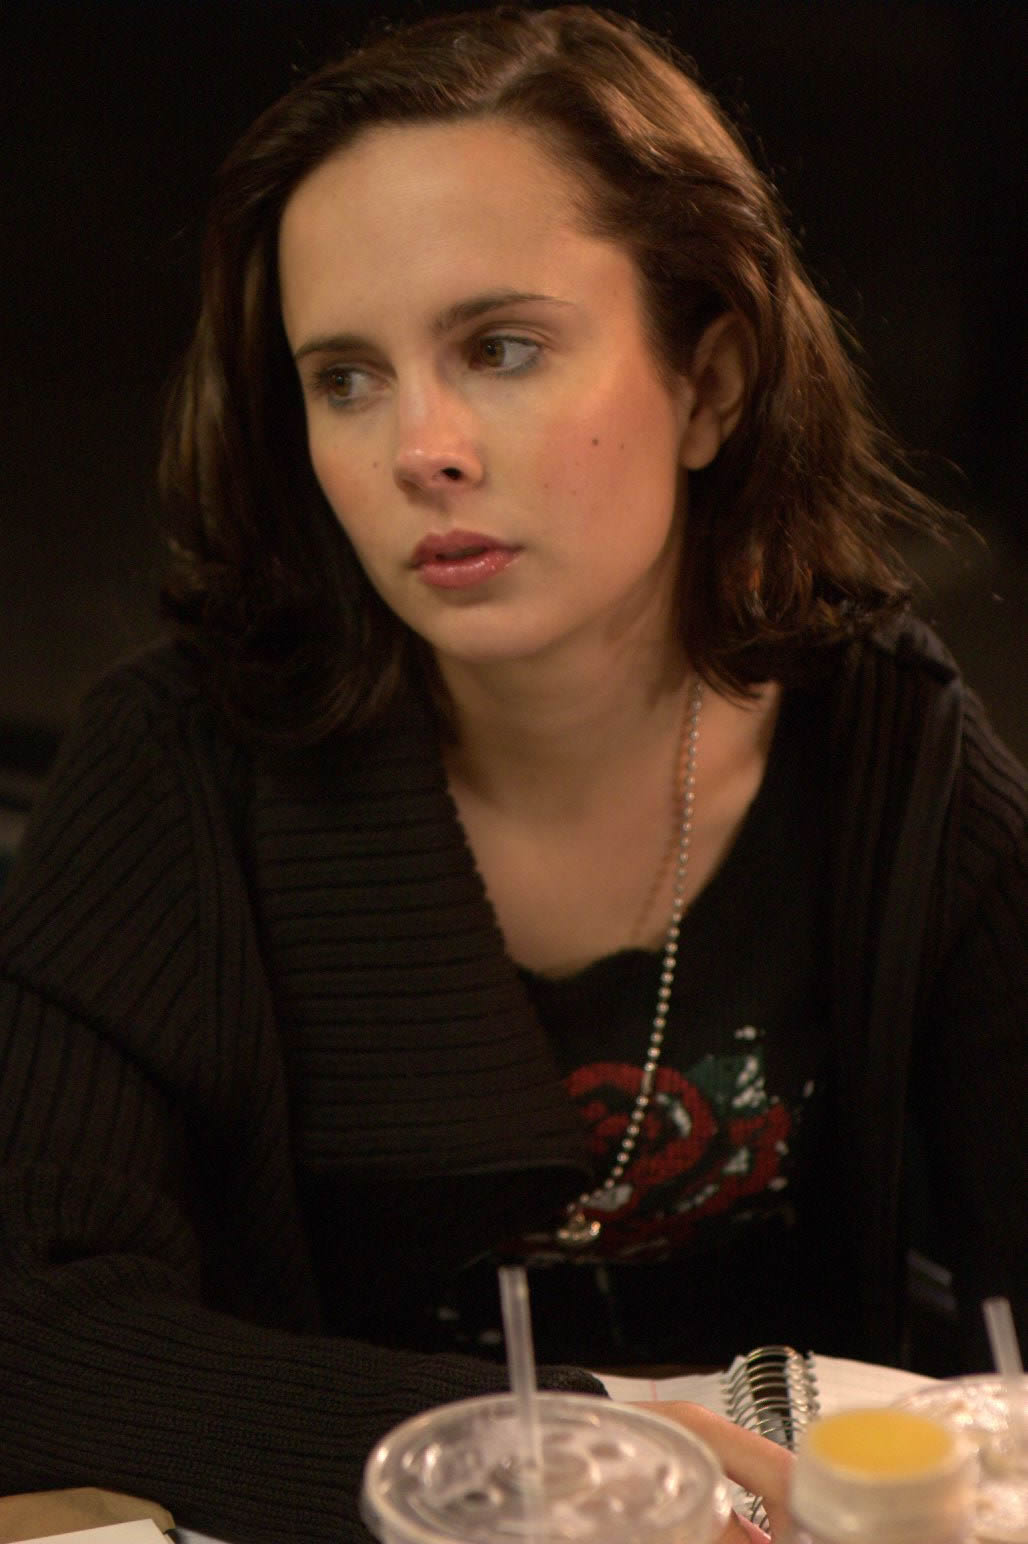 Lauren Birkell as Melissa in Peace Arch Entertainment's The Babysitters (2008)